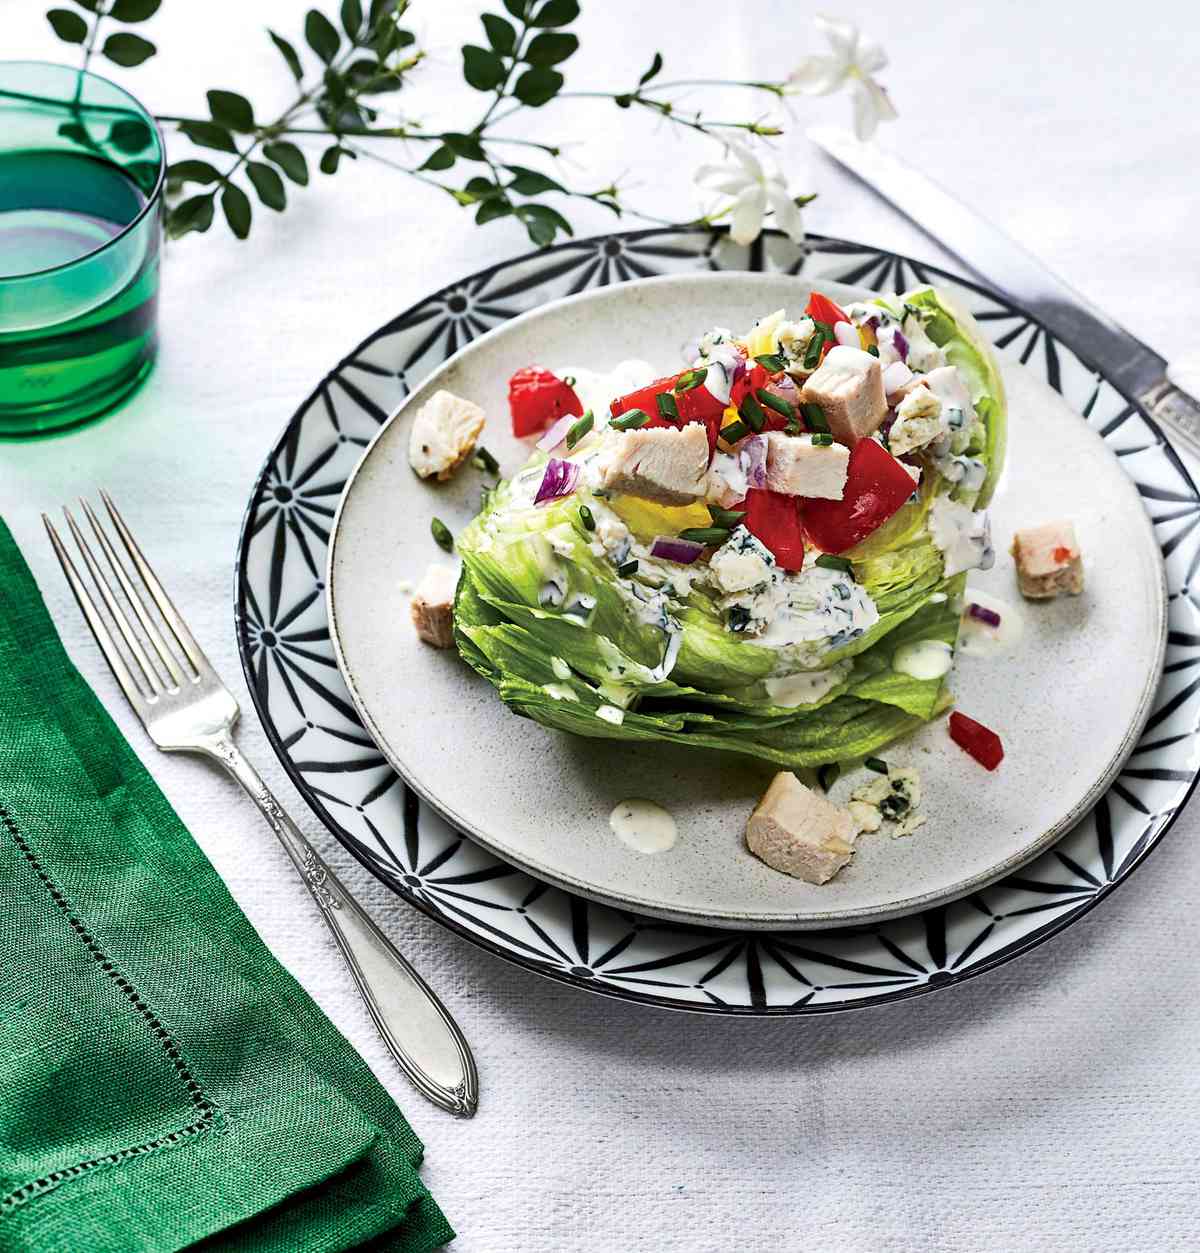 Wedge Salad with Turkey and Blue Cheese-Buttermilk Dressing